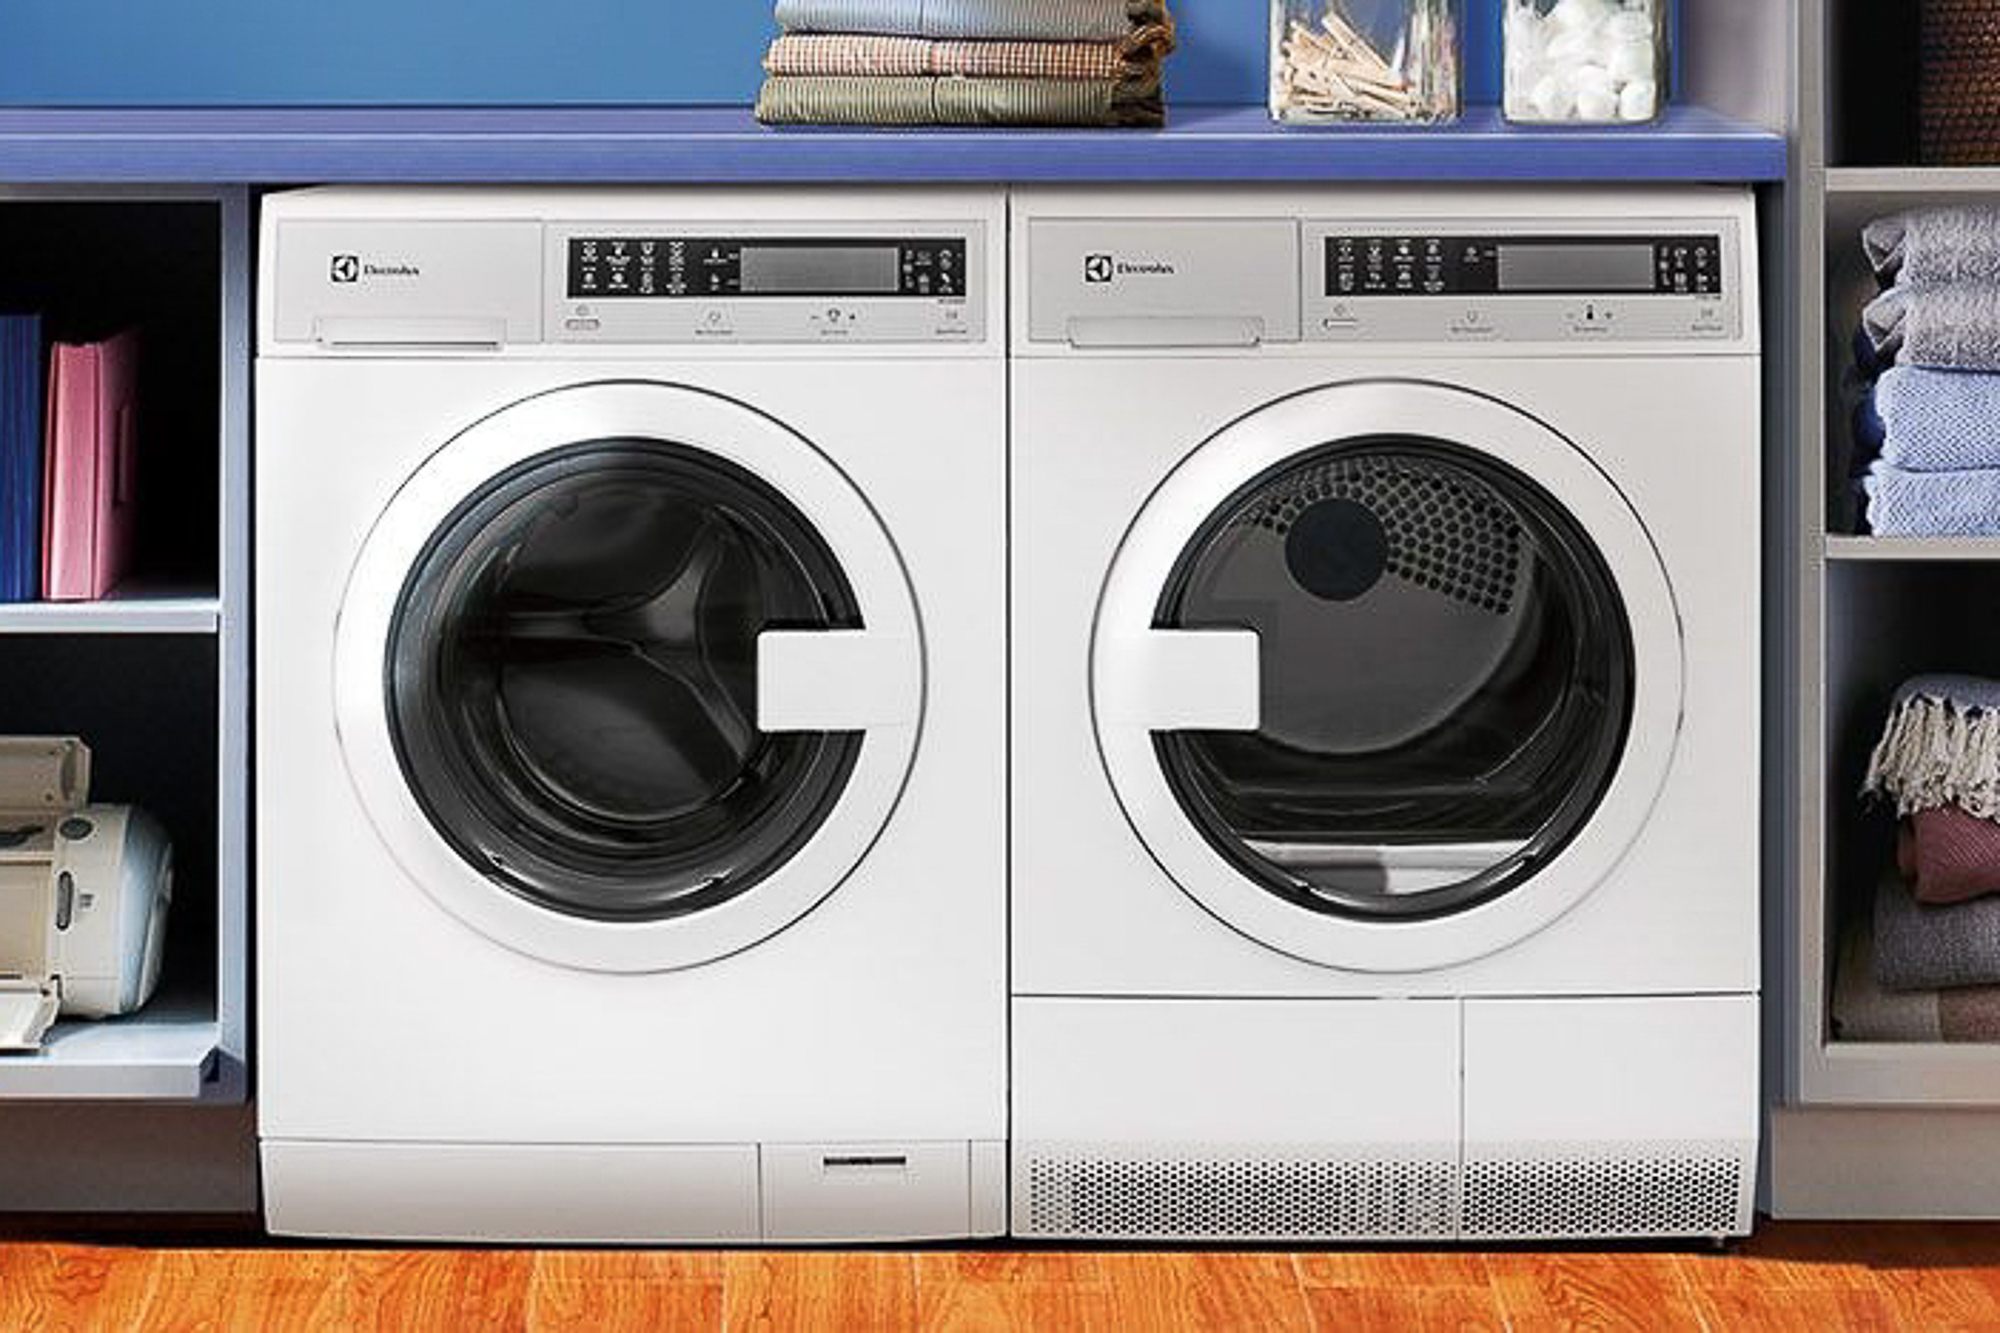 The best compact washer and dryer | DeviceDaily.com